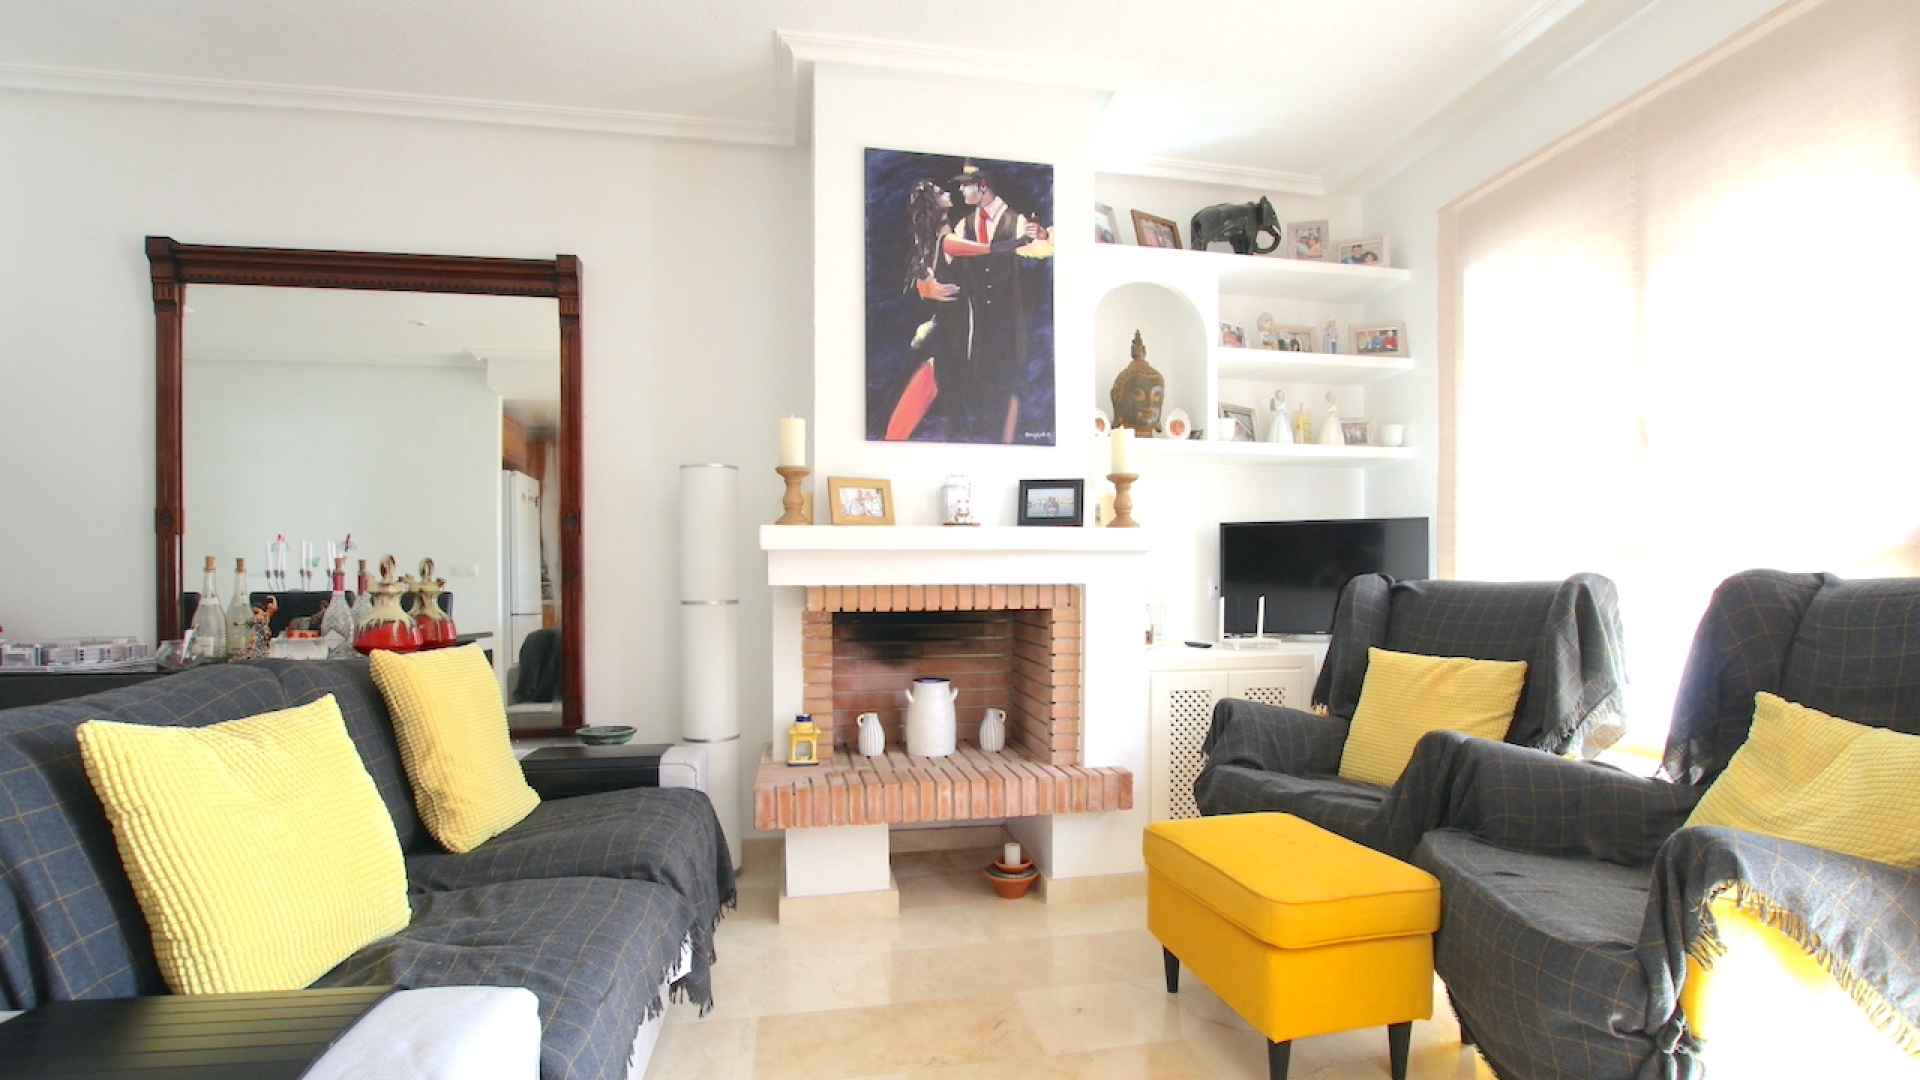 48344_superior_3_bed_2_bath_townhouse_with_pool_views_(pau_8)_080224142632_img_6515